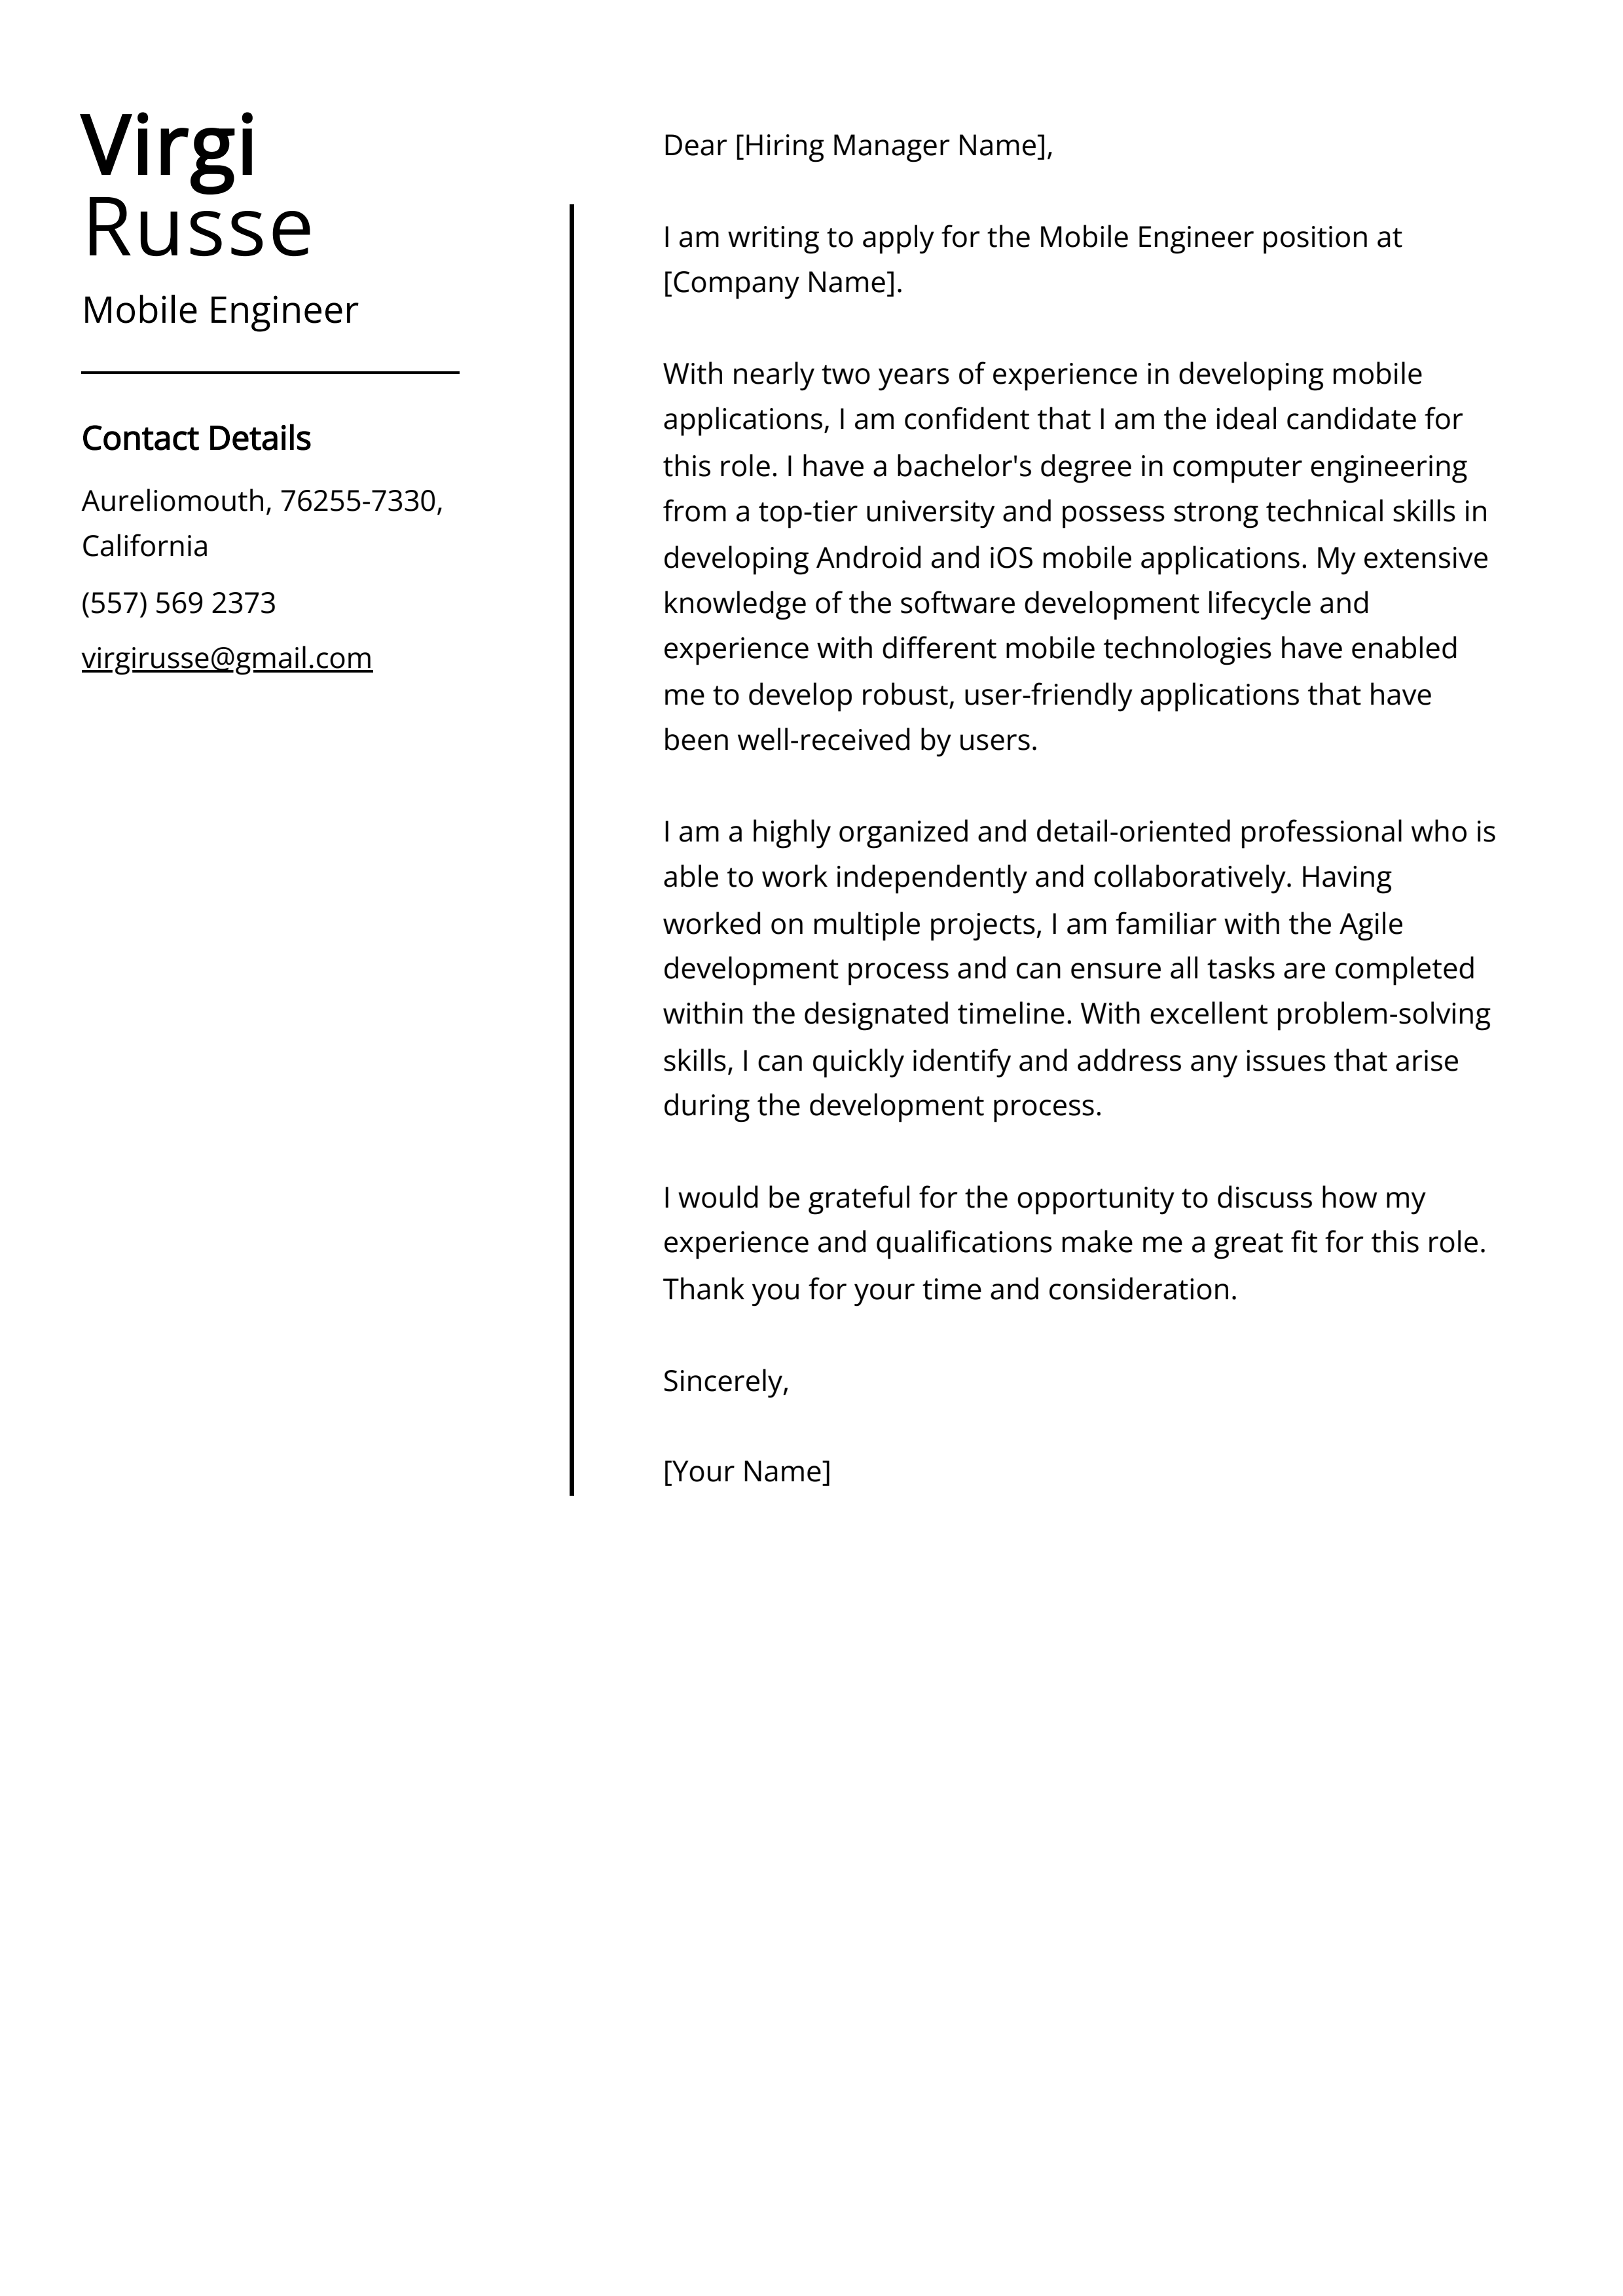 Mobile Engineer Cover Letter Example